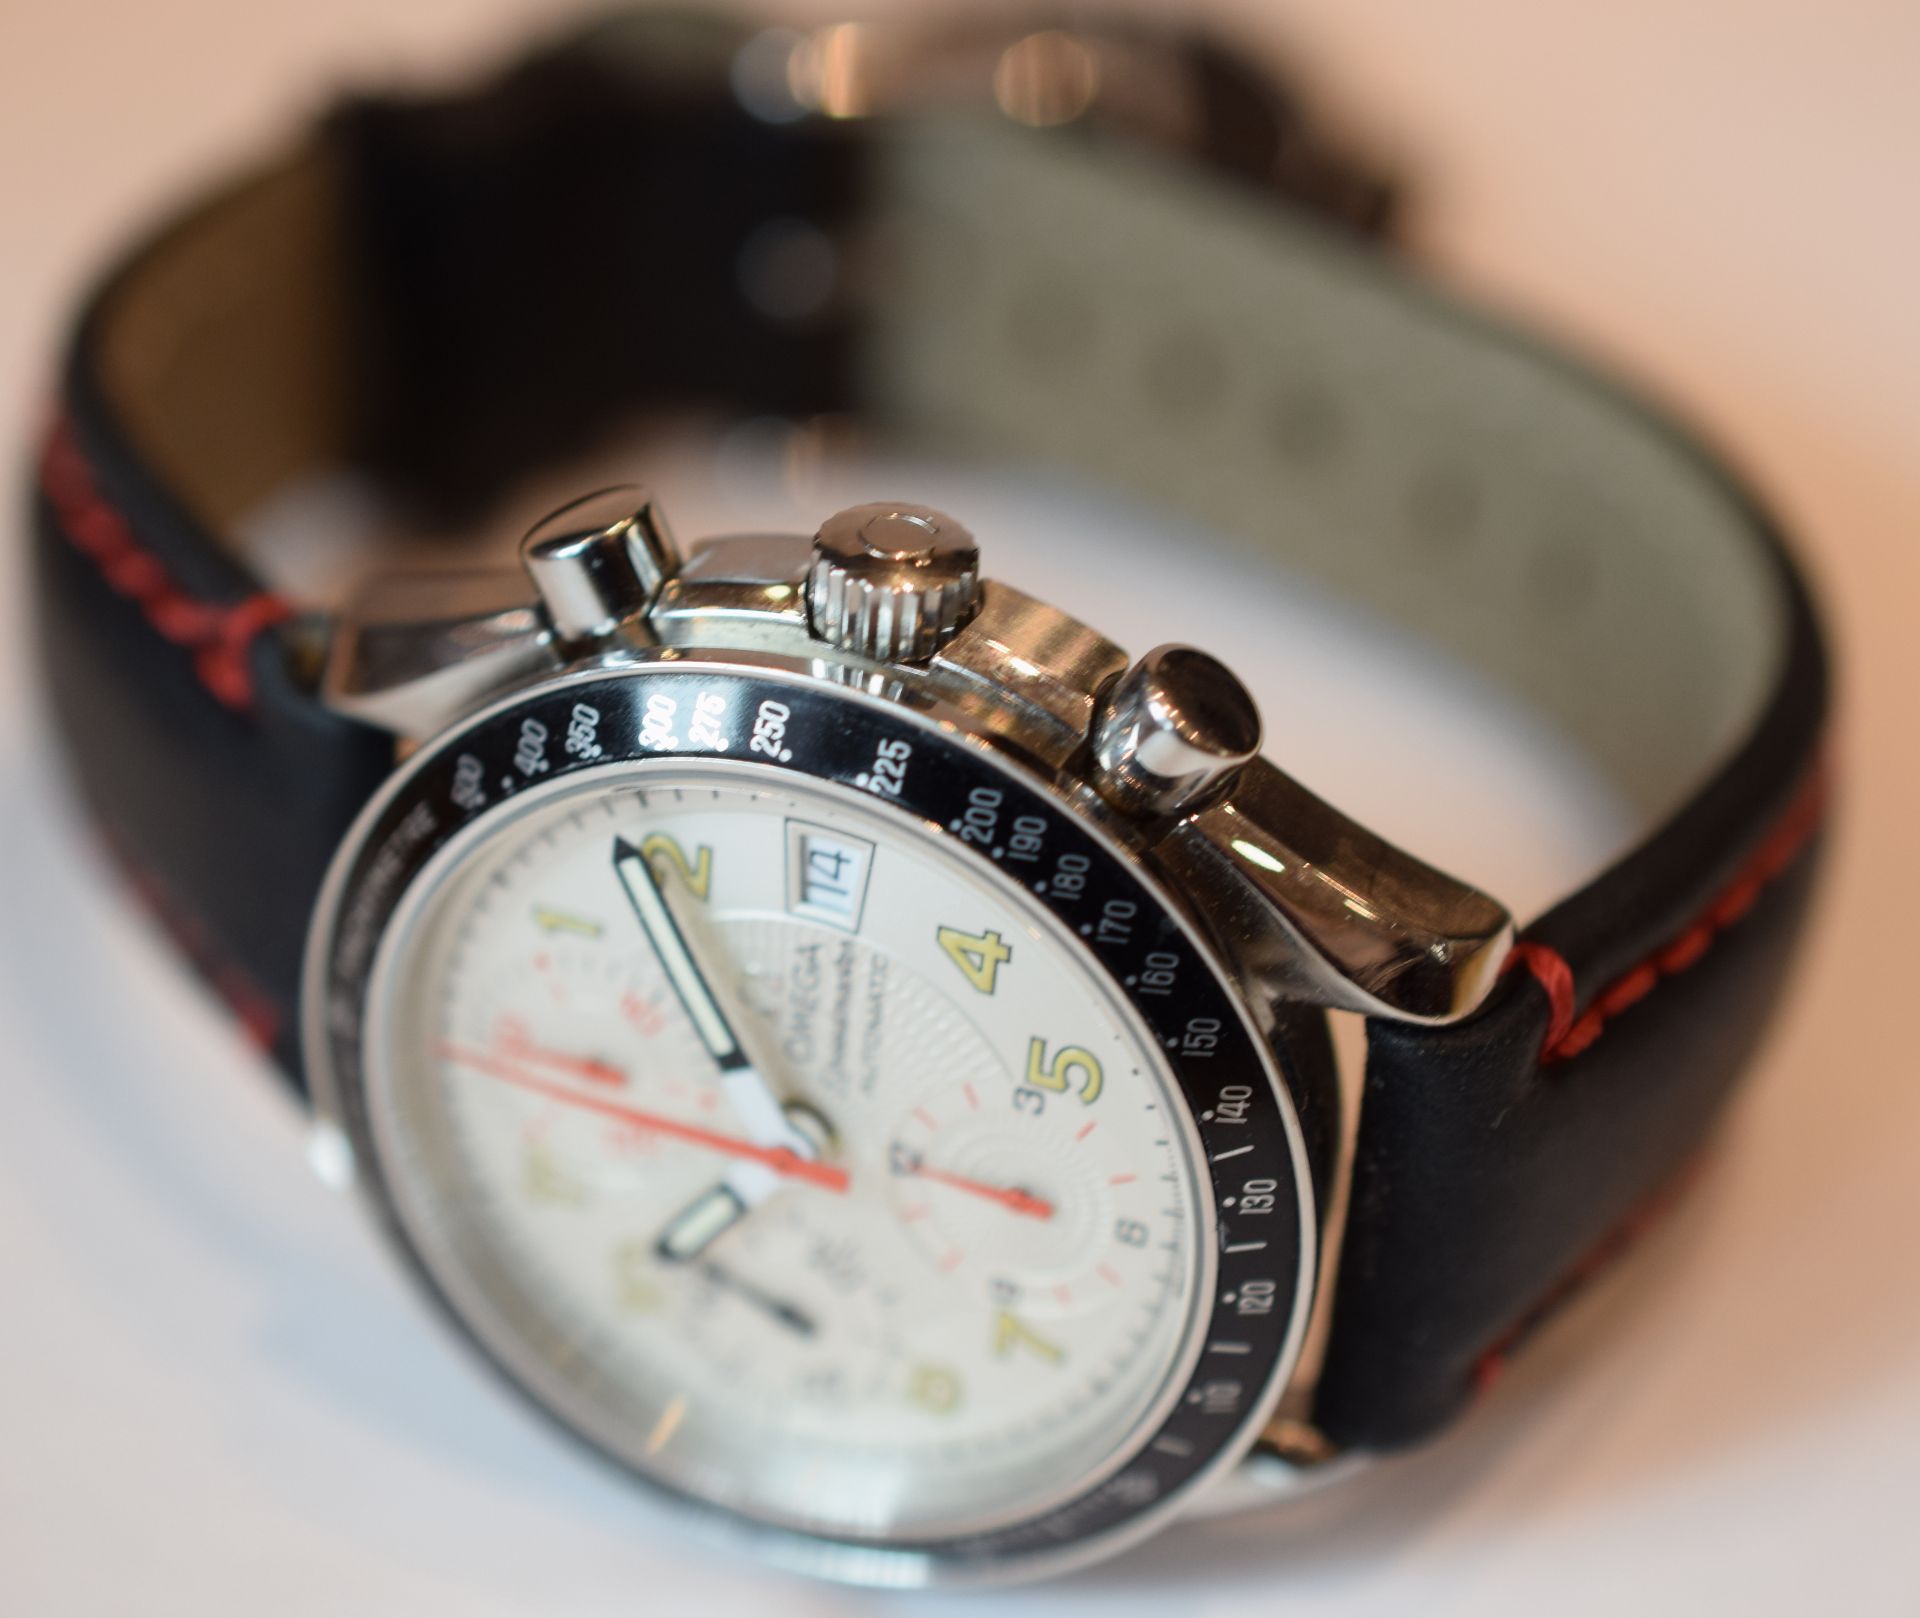 Rare Omega Speedmaster With Mk 40 Guilloche Dial - Image 3 of 8